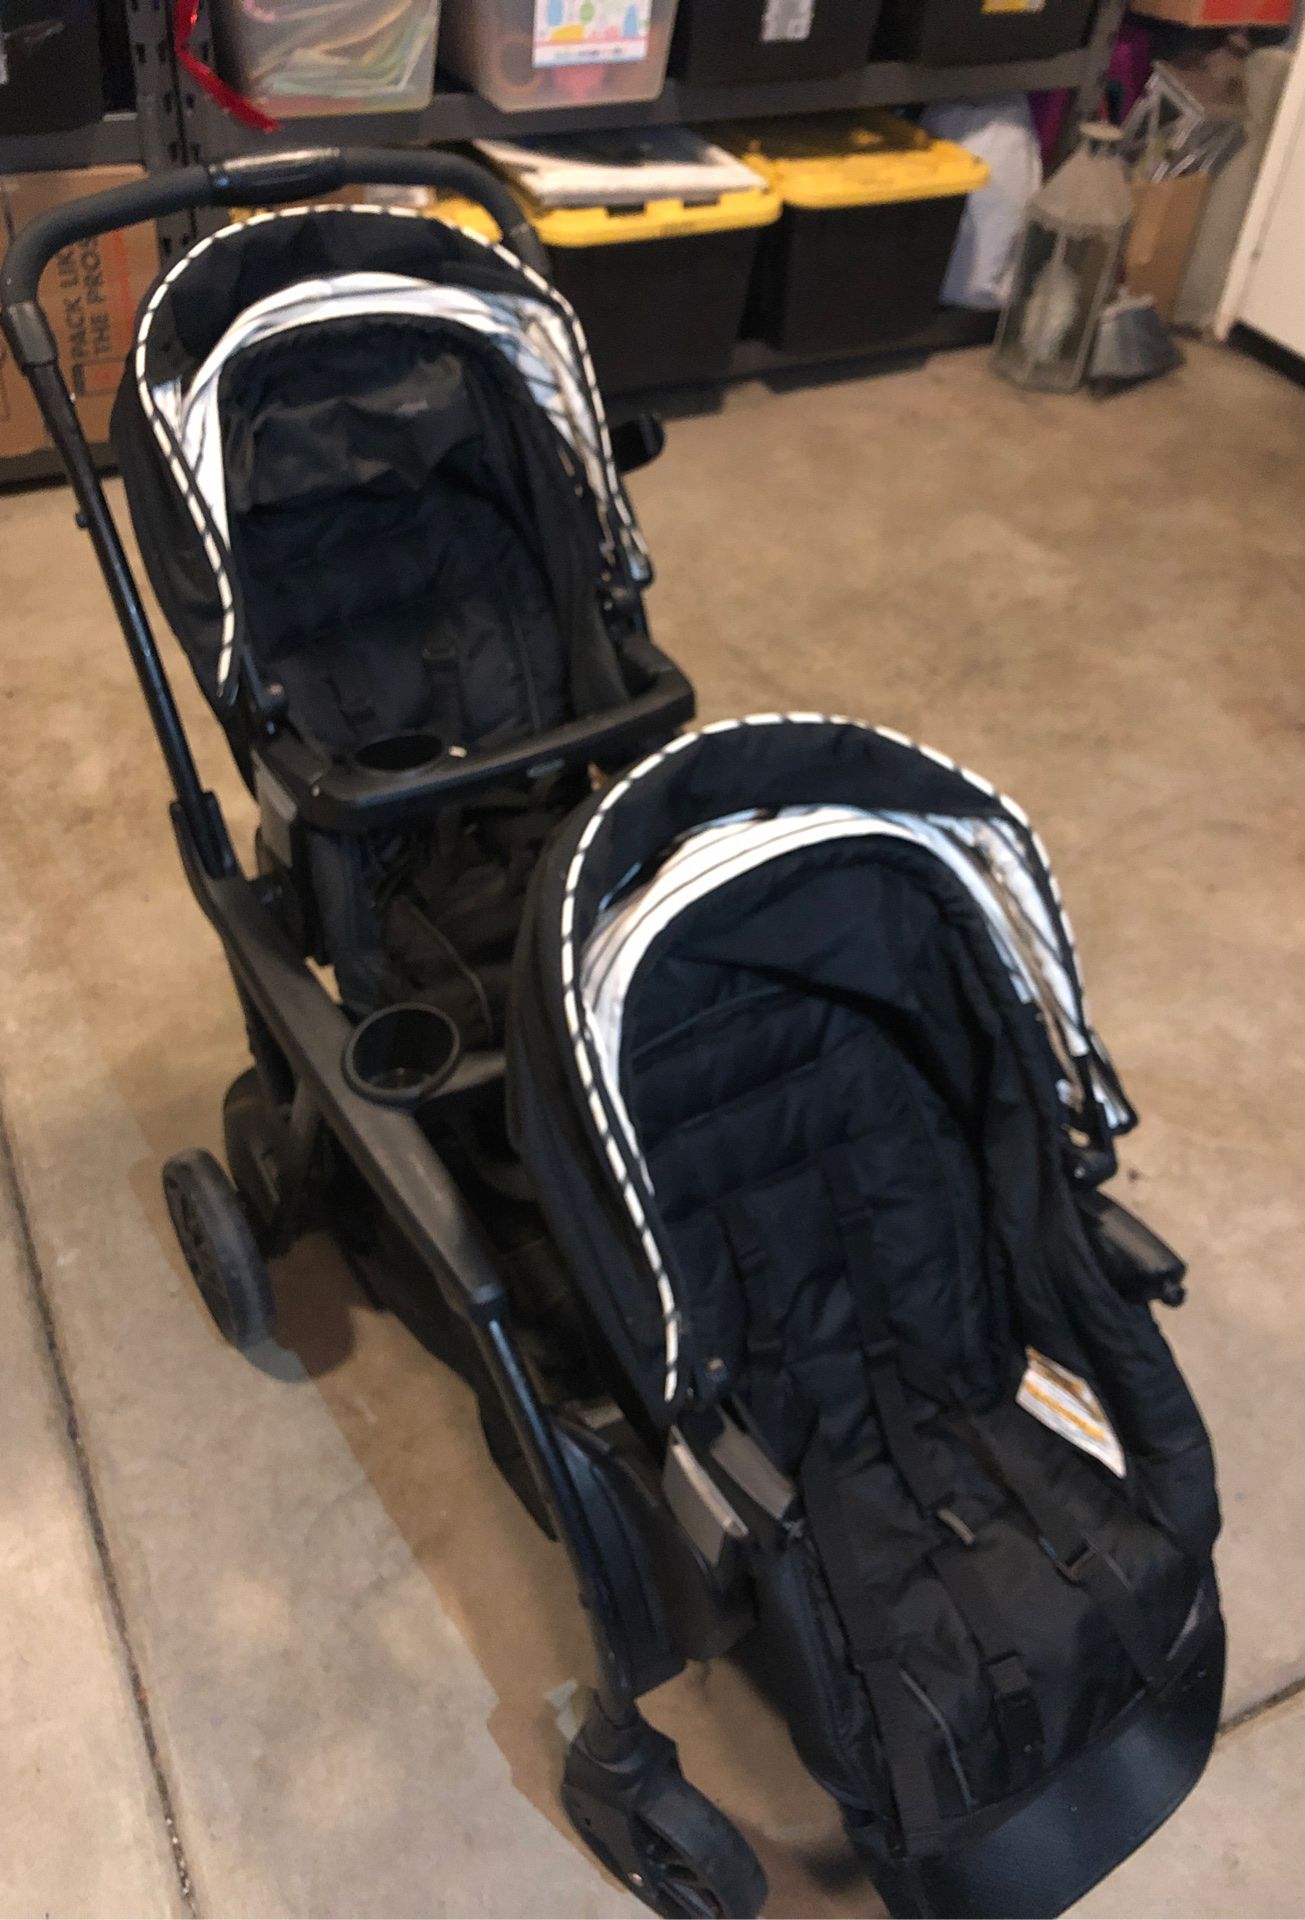 Stroller / double seat